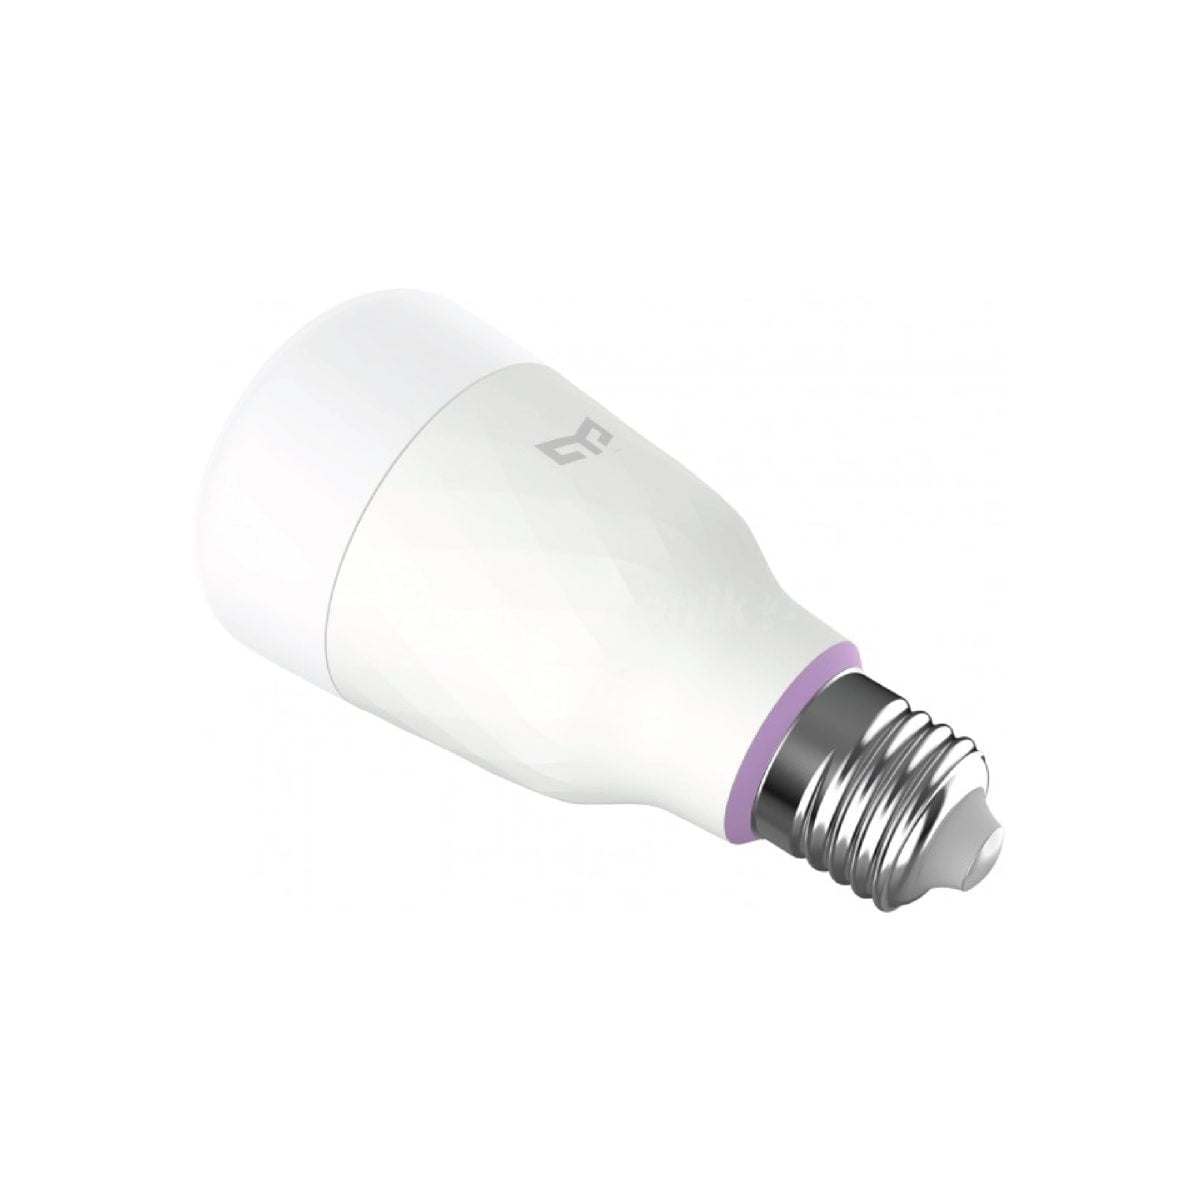 Bulb 25 Xiaomi The Yeelight 1S Rgb Smart Light Bulb Will Allow You To Create Your Own Smart Home. You Can Control It With Your Voice Or Application And Decide With What Temperature And Power It Should Shine. Luminous Flux: 800Lm Color Temperature: 1700K-6500K Lamp Holder: E27 Rated Power: 8.5W &Nbsp; 16 Million Colors Wifi Enabled, Voice Control, App Control, Music Sync &Lt;Img Class=&Quot;Alignnone Wp-Image-8061 Size-Full&Quot; Src=&Quot;Https://Lablaab.com/Wp-Content/Uploads/2020/04/Bulb-27-2-Scaled.jpg&Quot; Alt=&Quot;&Quot; Width=&Quot;2560&Quot; Height=&Quot;357&Quot; /&Gt; &Nbsp; Yeelight Smart Bulb Yeelight Smart Bulb 1S (Color)